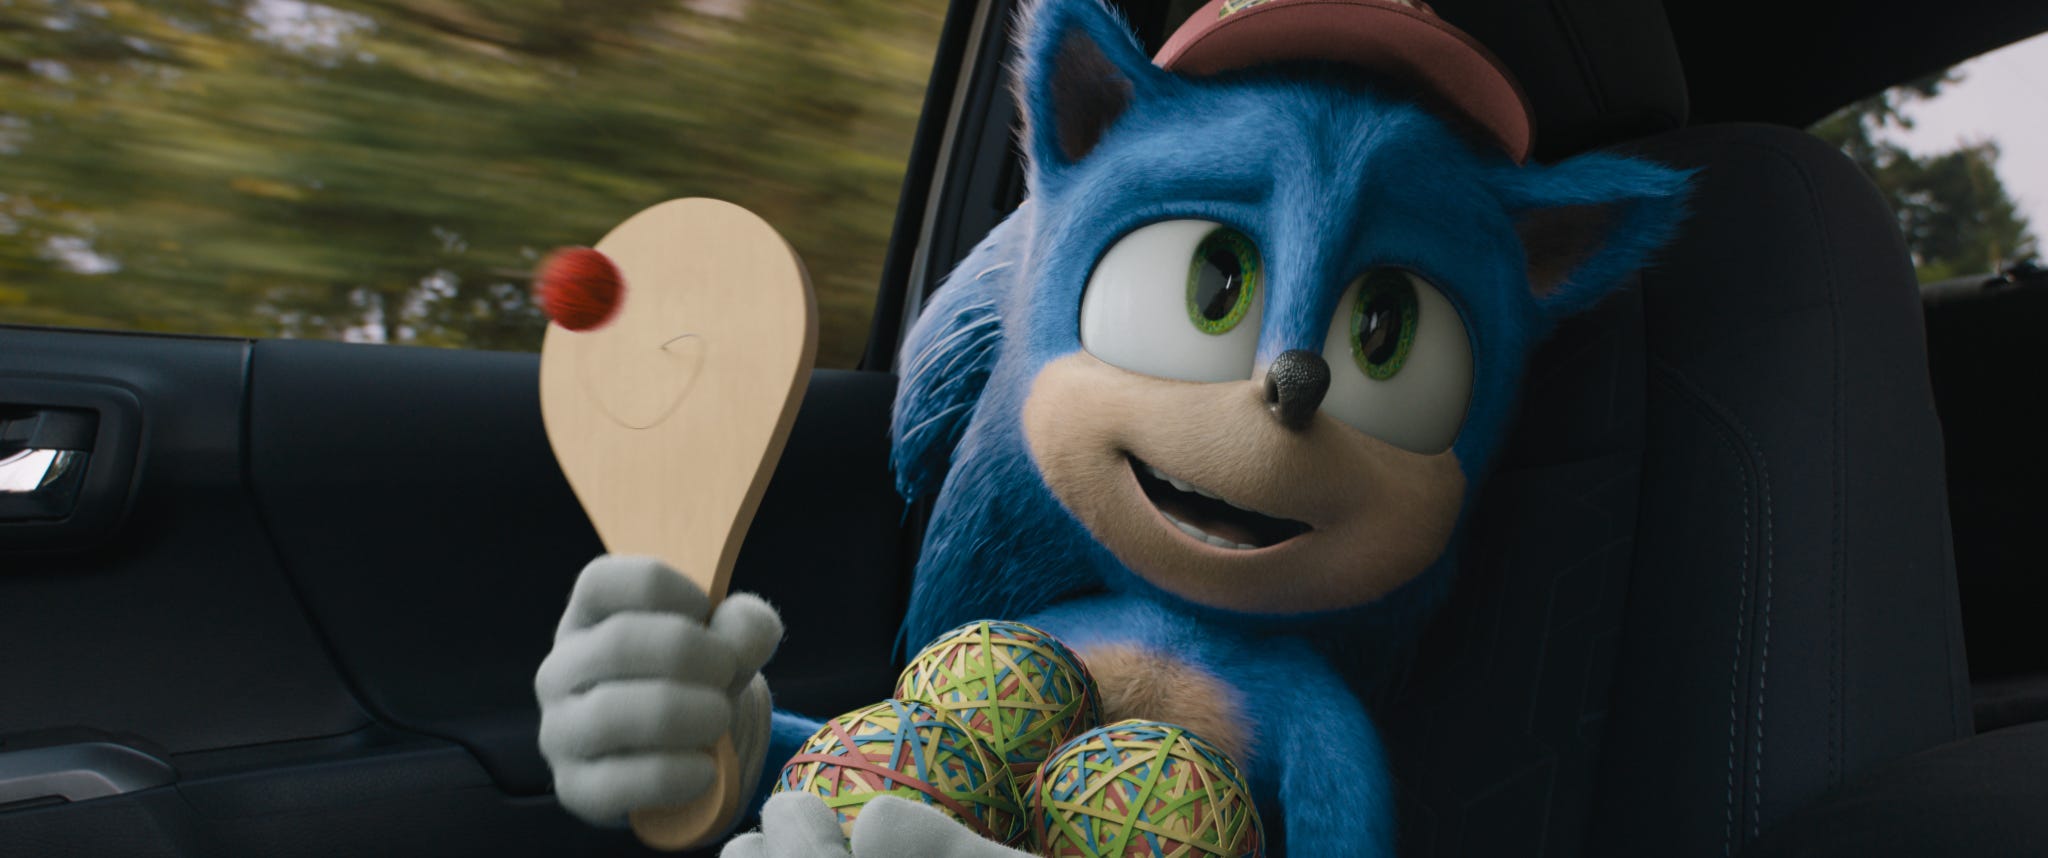 Sonic the Hedgehog' makes room for 'Call of the Wild' at box office